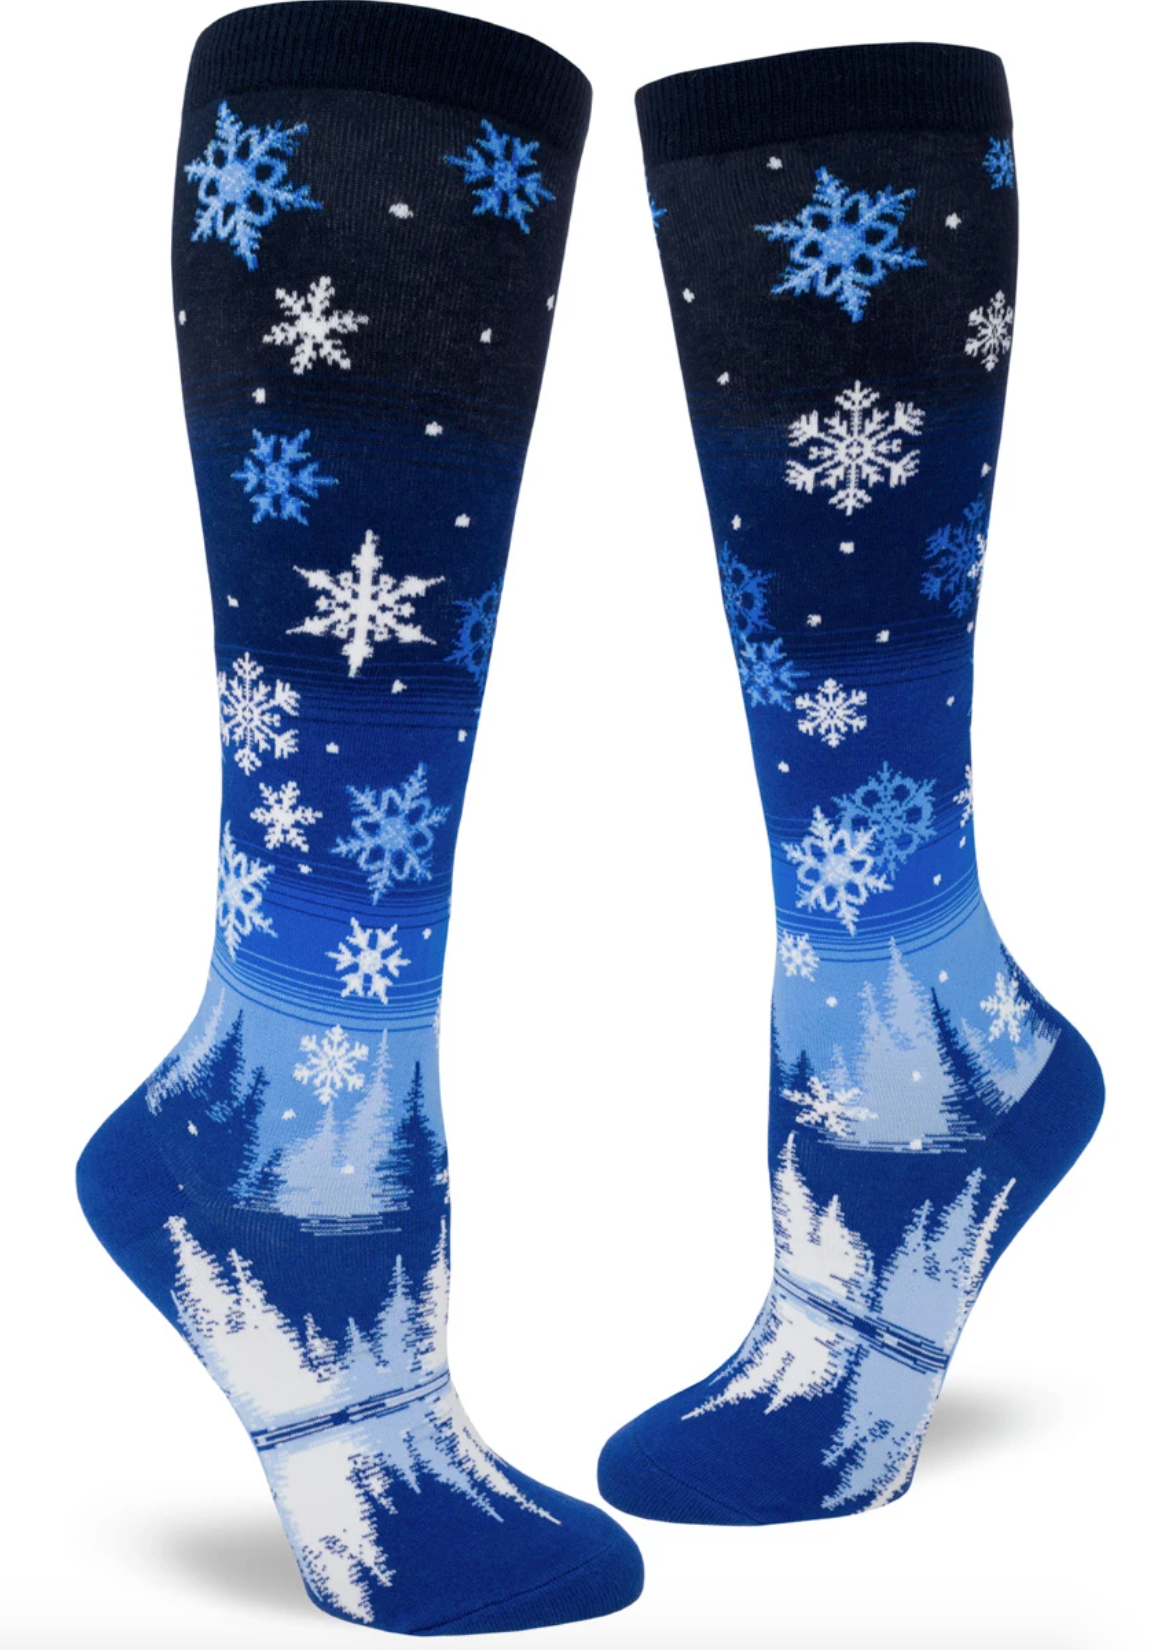 Sock - Knee-High: Snowflakes - Into the Blue